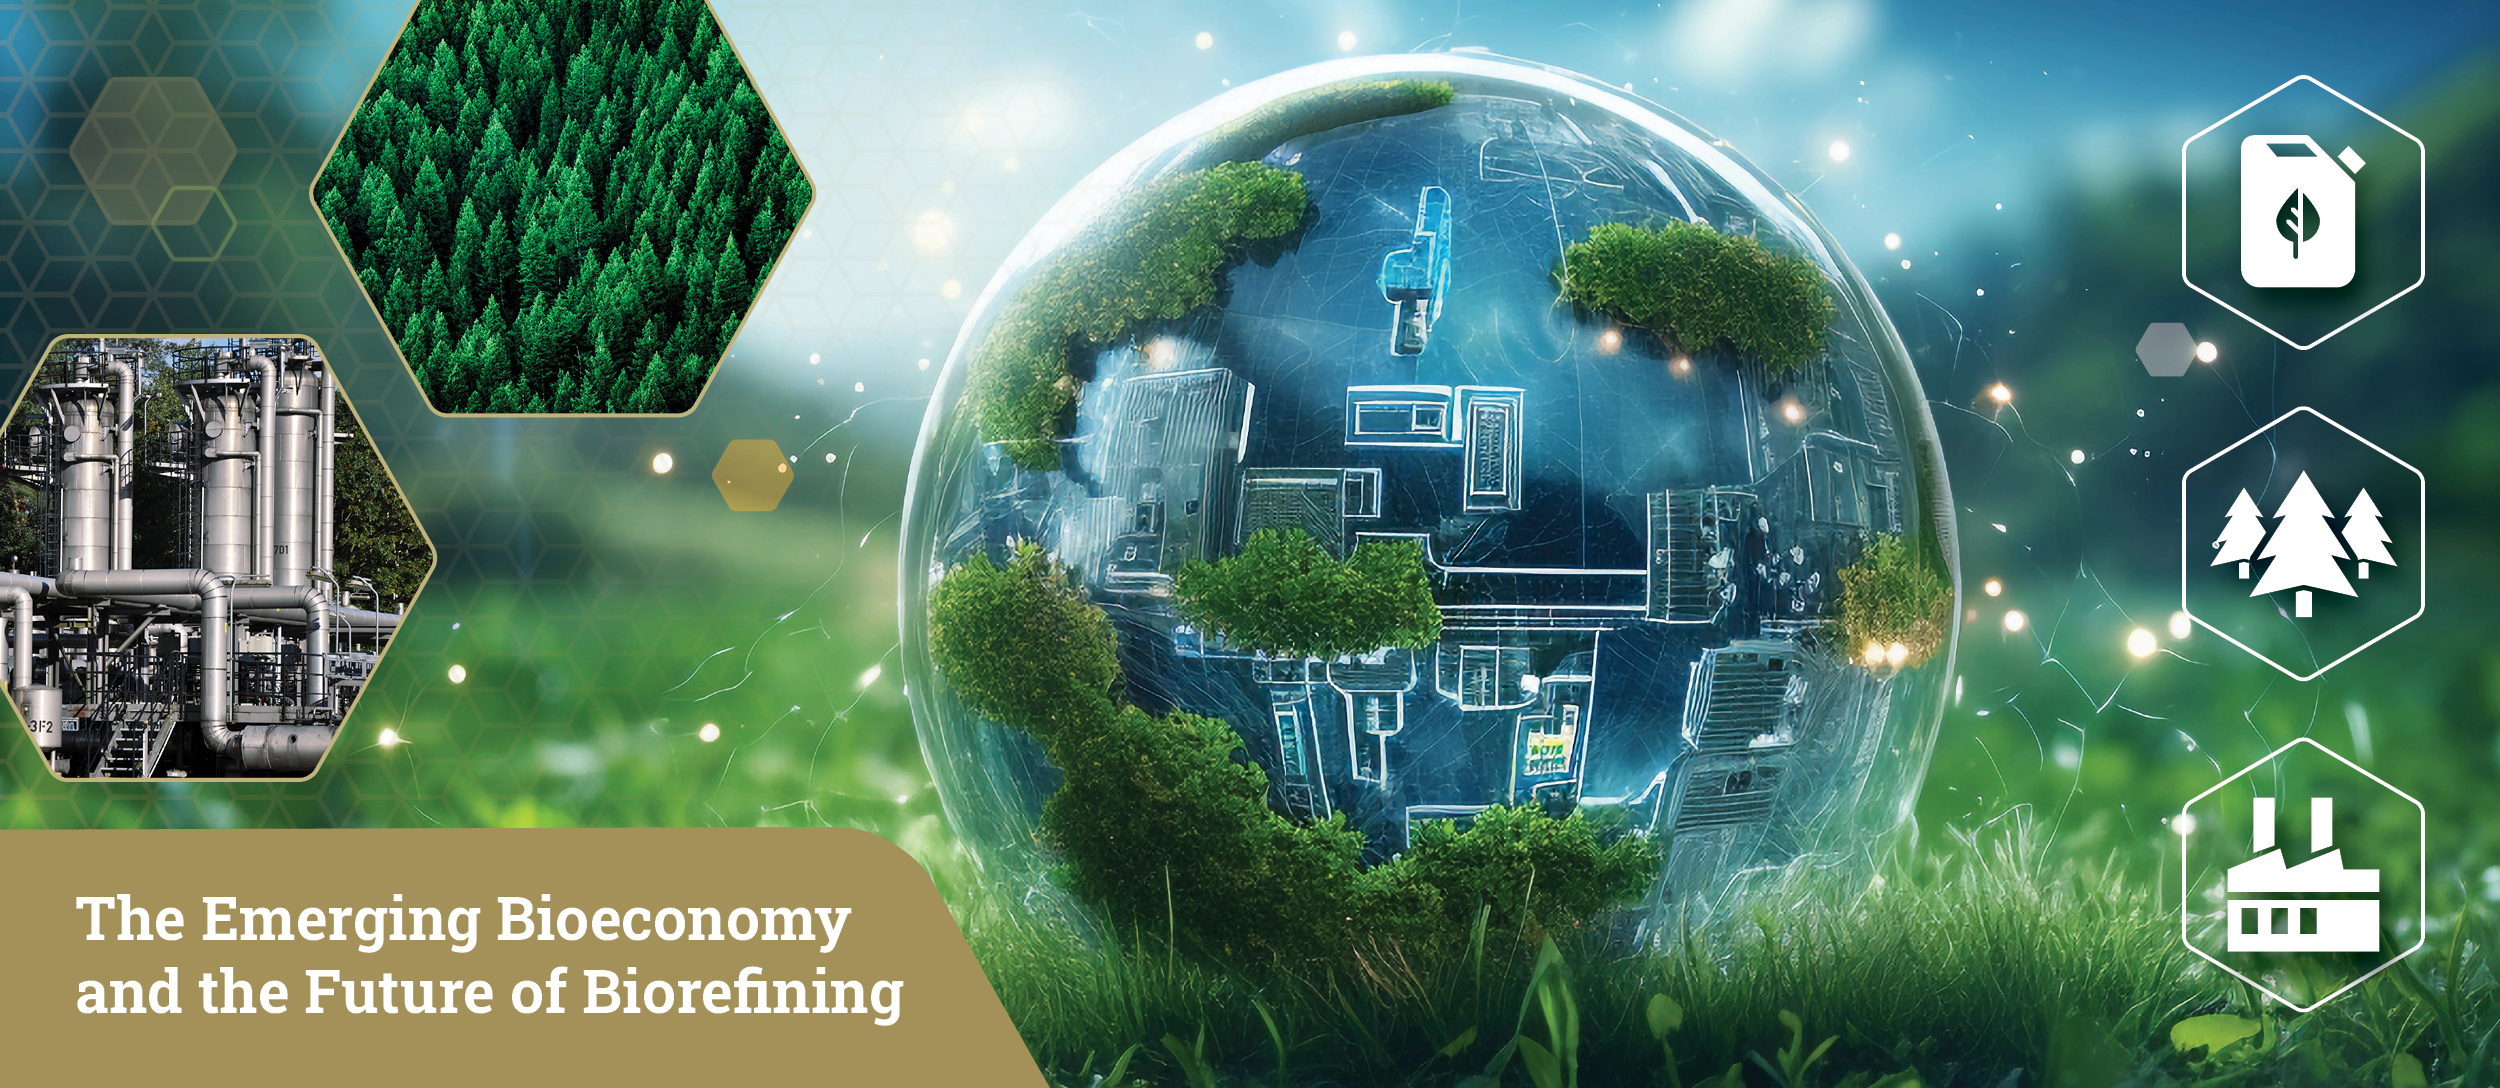 RBI workshop banner with a green globe and icons representing renewable bioproducts.